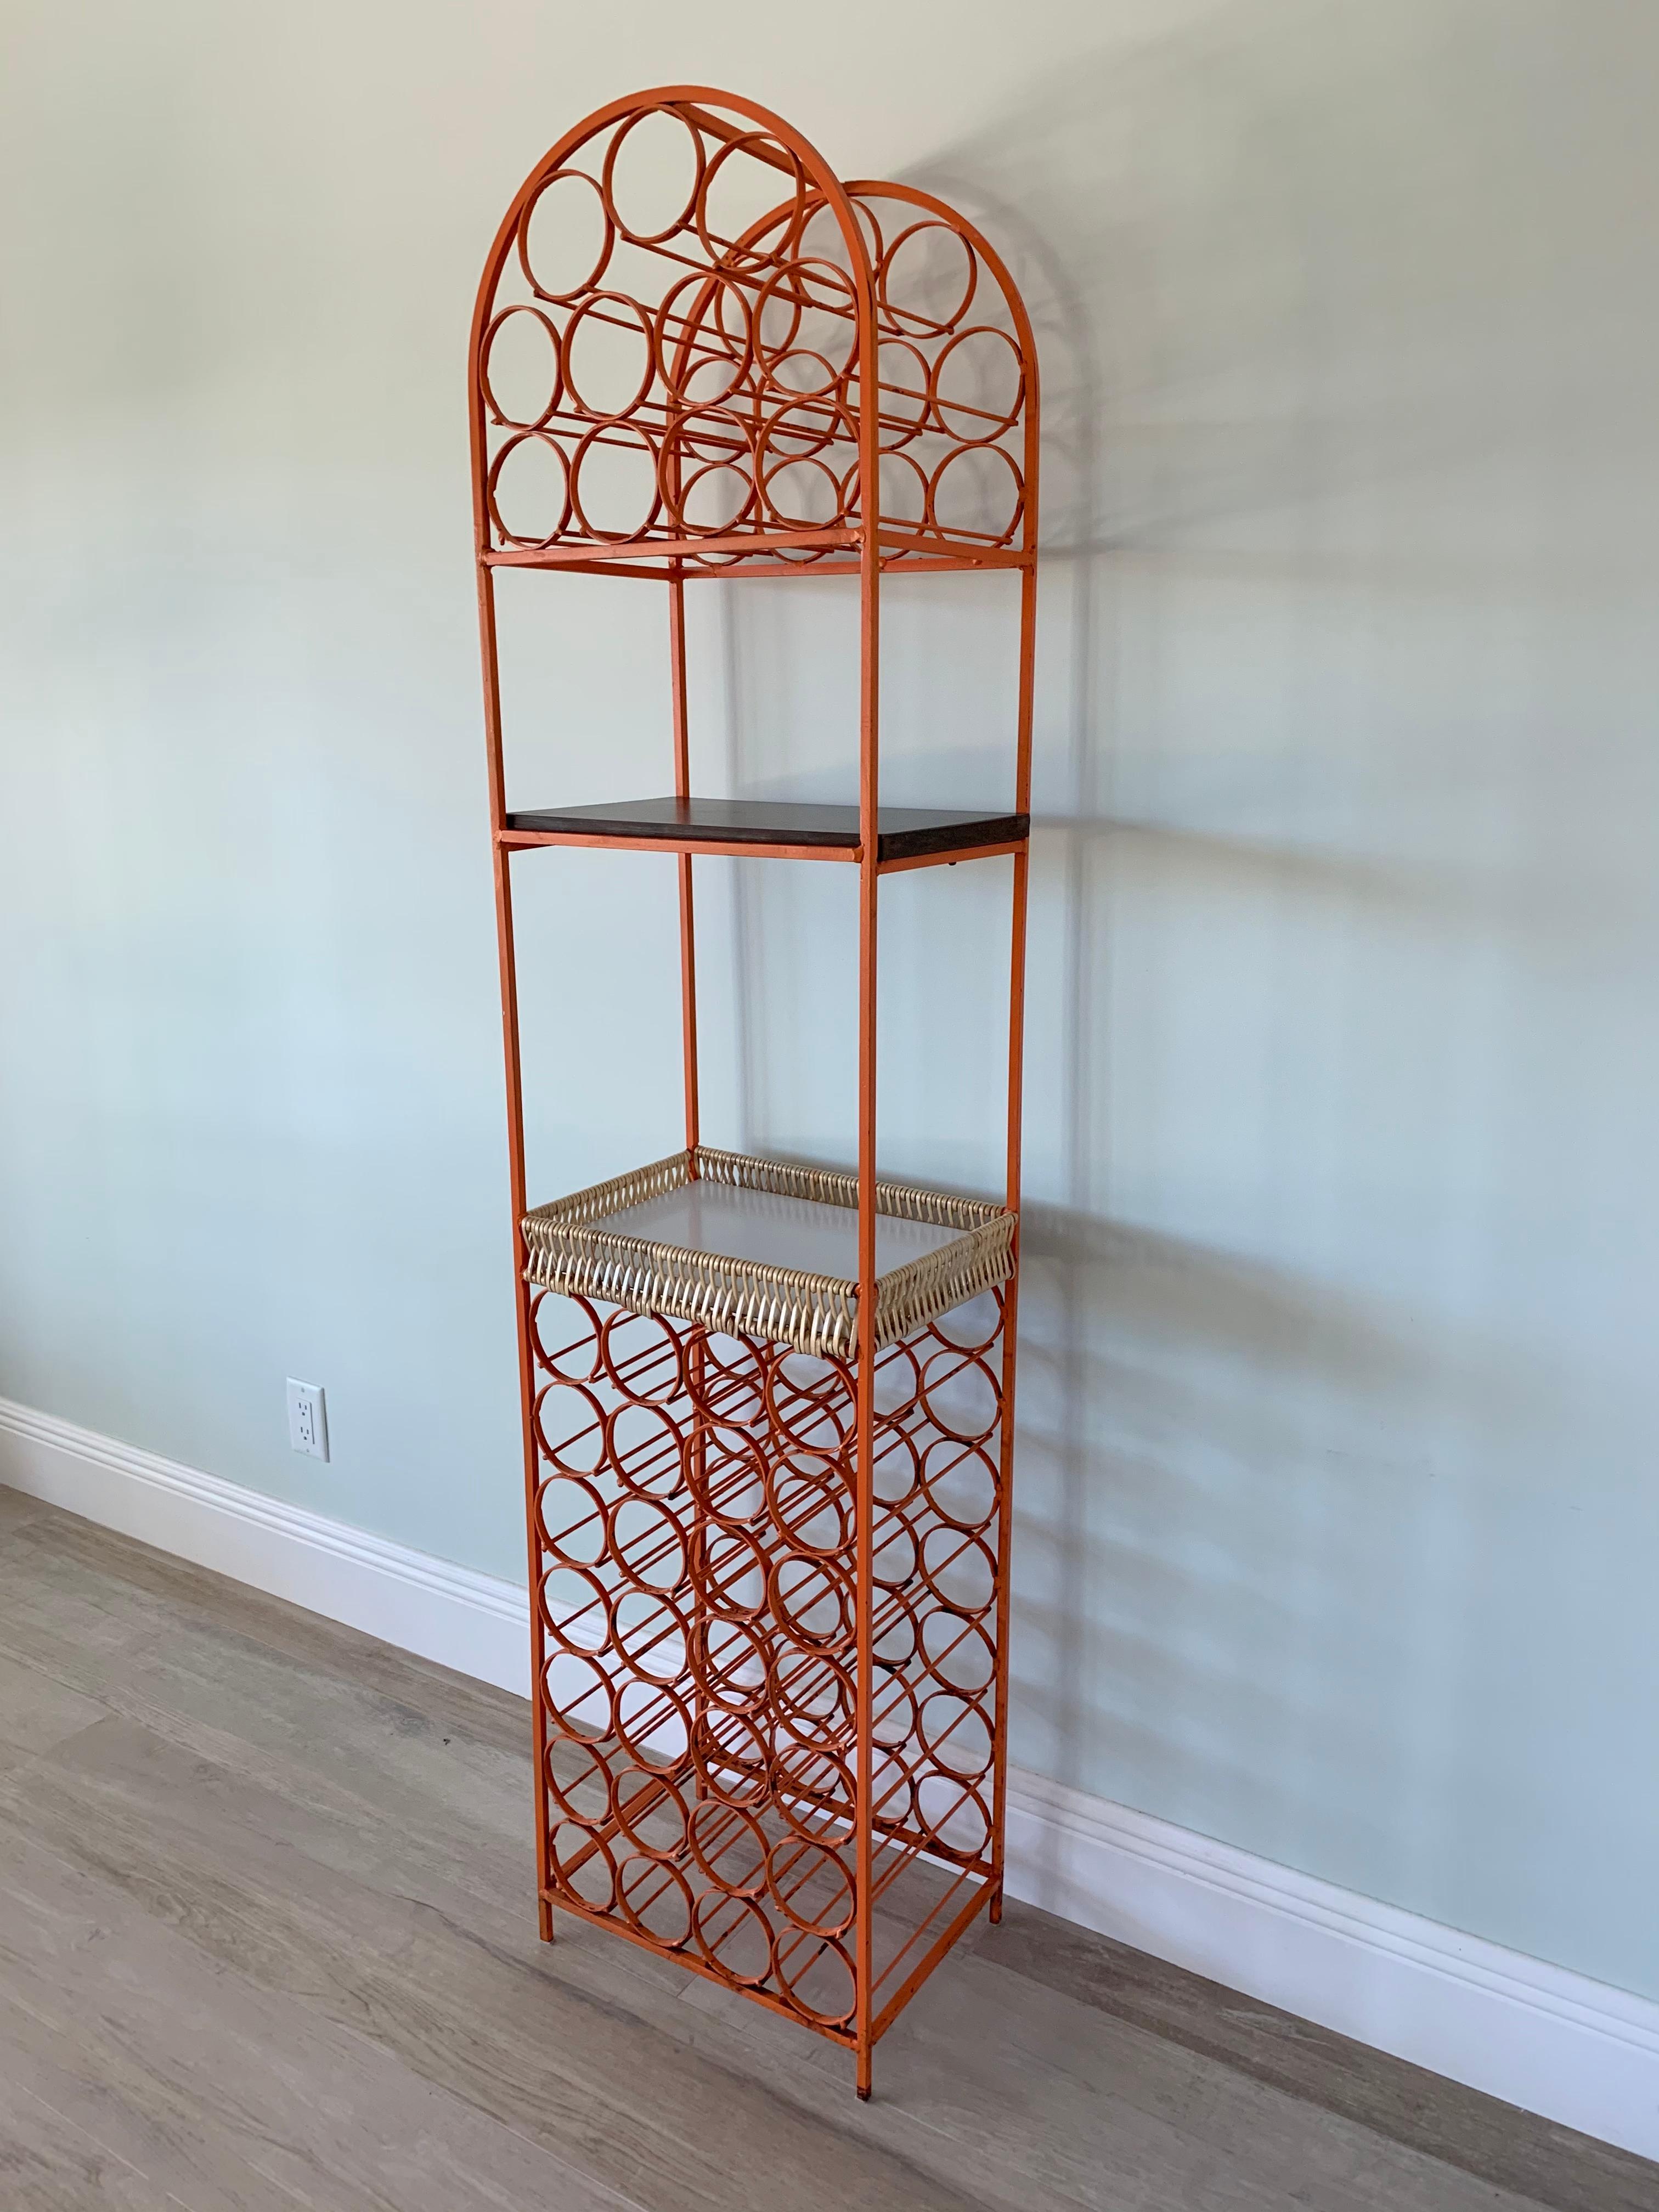 Orange wrought iron wine rack by Arthur Umanoff.
It can hold up to 39 bottles and includes a woven basket type shelf and a laminated shelf to hold glasses, serve drinks or even showcase you favorite bottles and bar utensils.
Manufactured for the